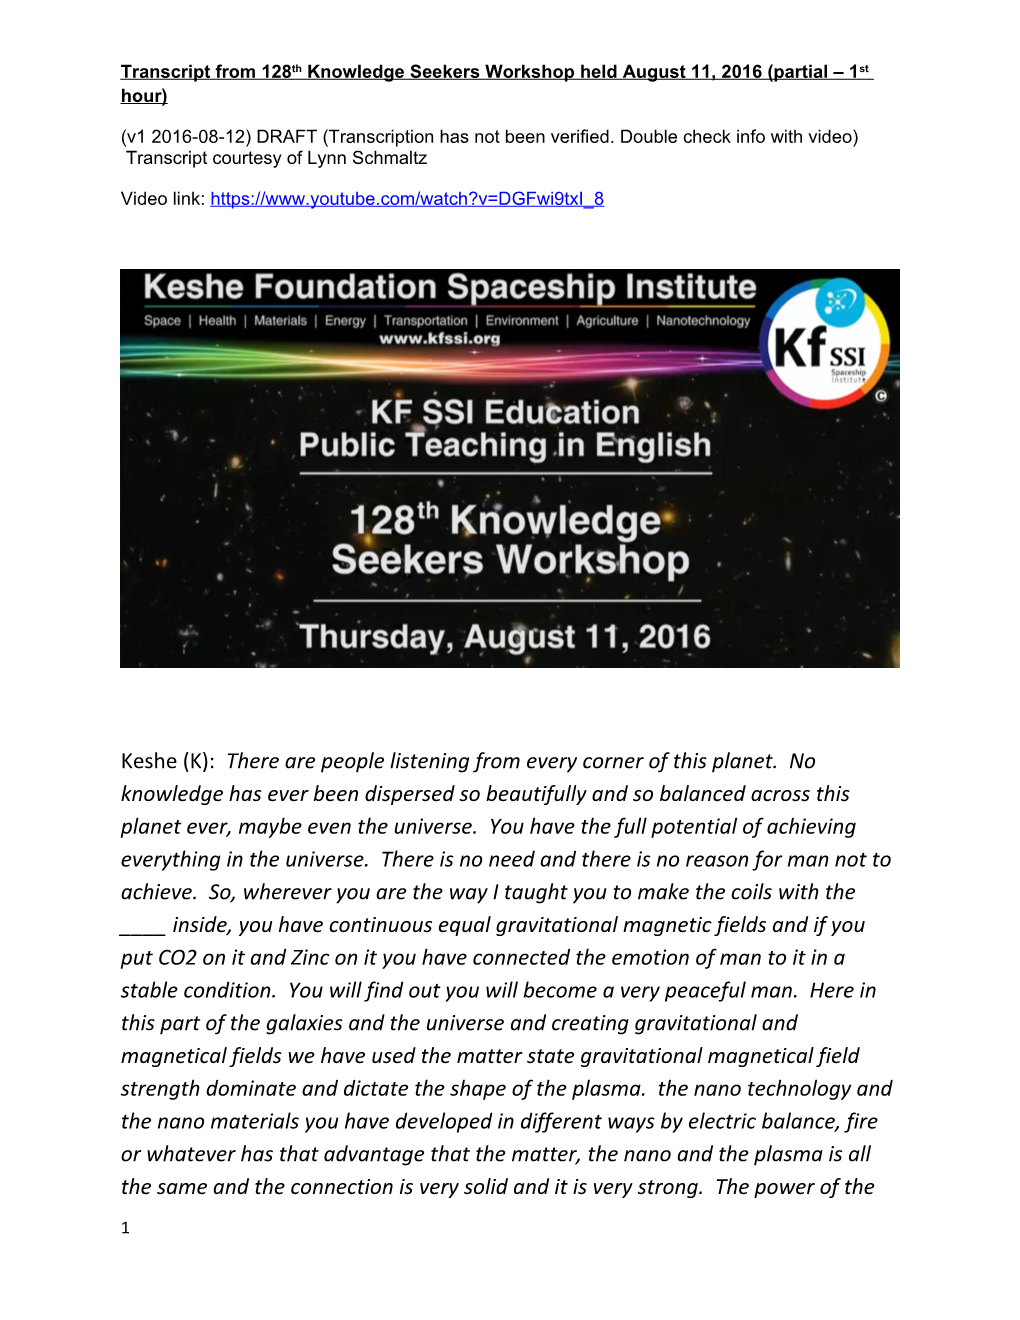 Transcript from 128Th Knowledge Seekers Workshop Held August 11, 2016 (Partial 1St Hour)